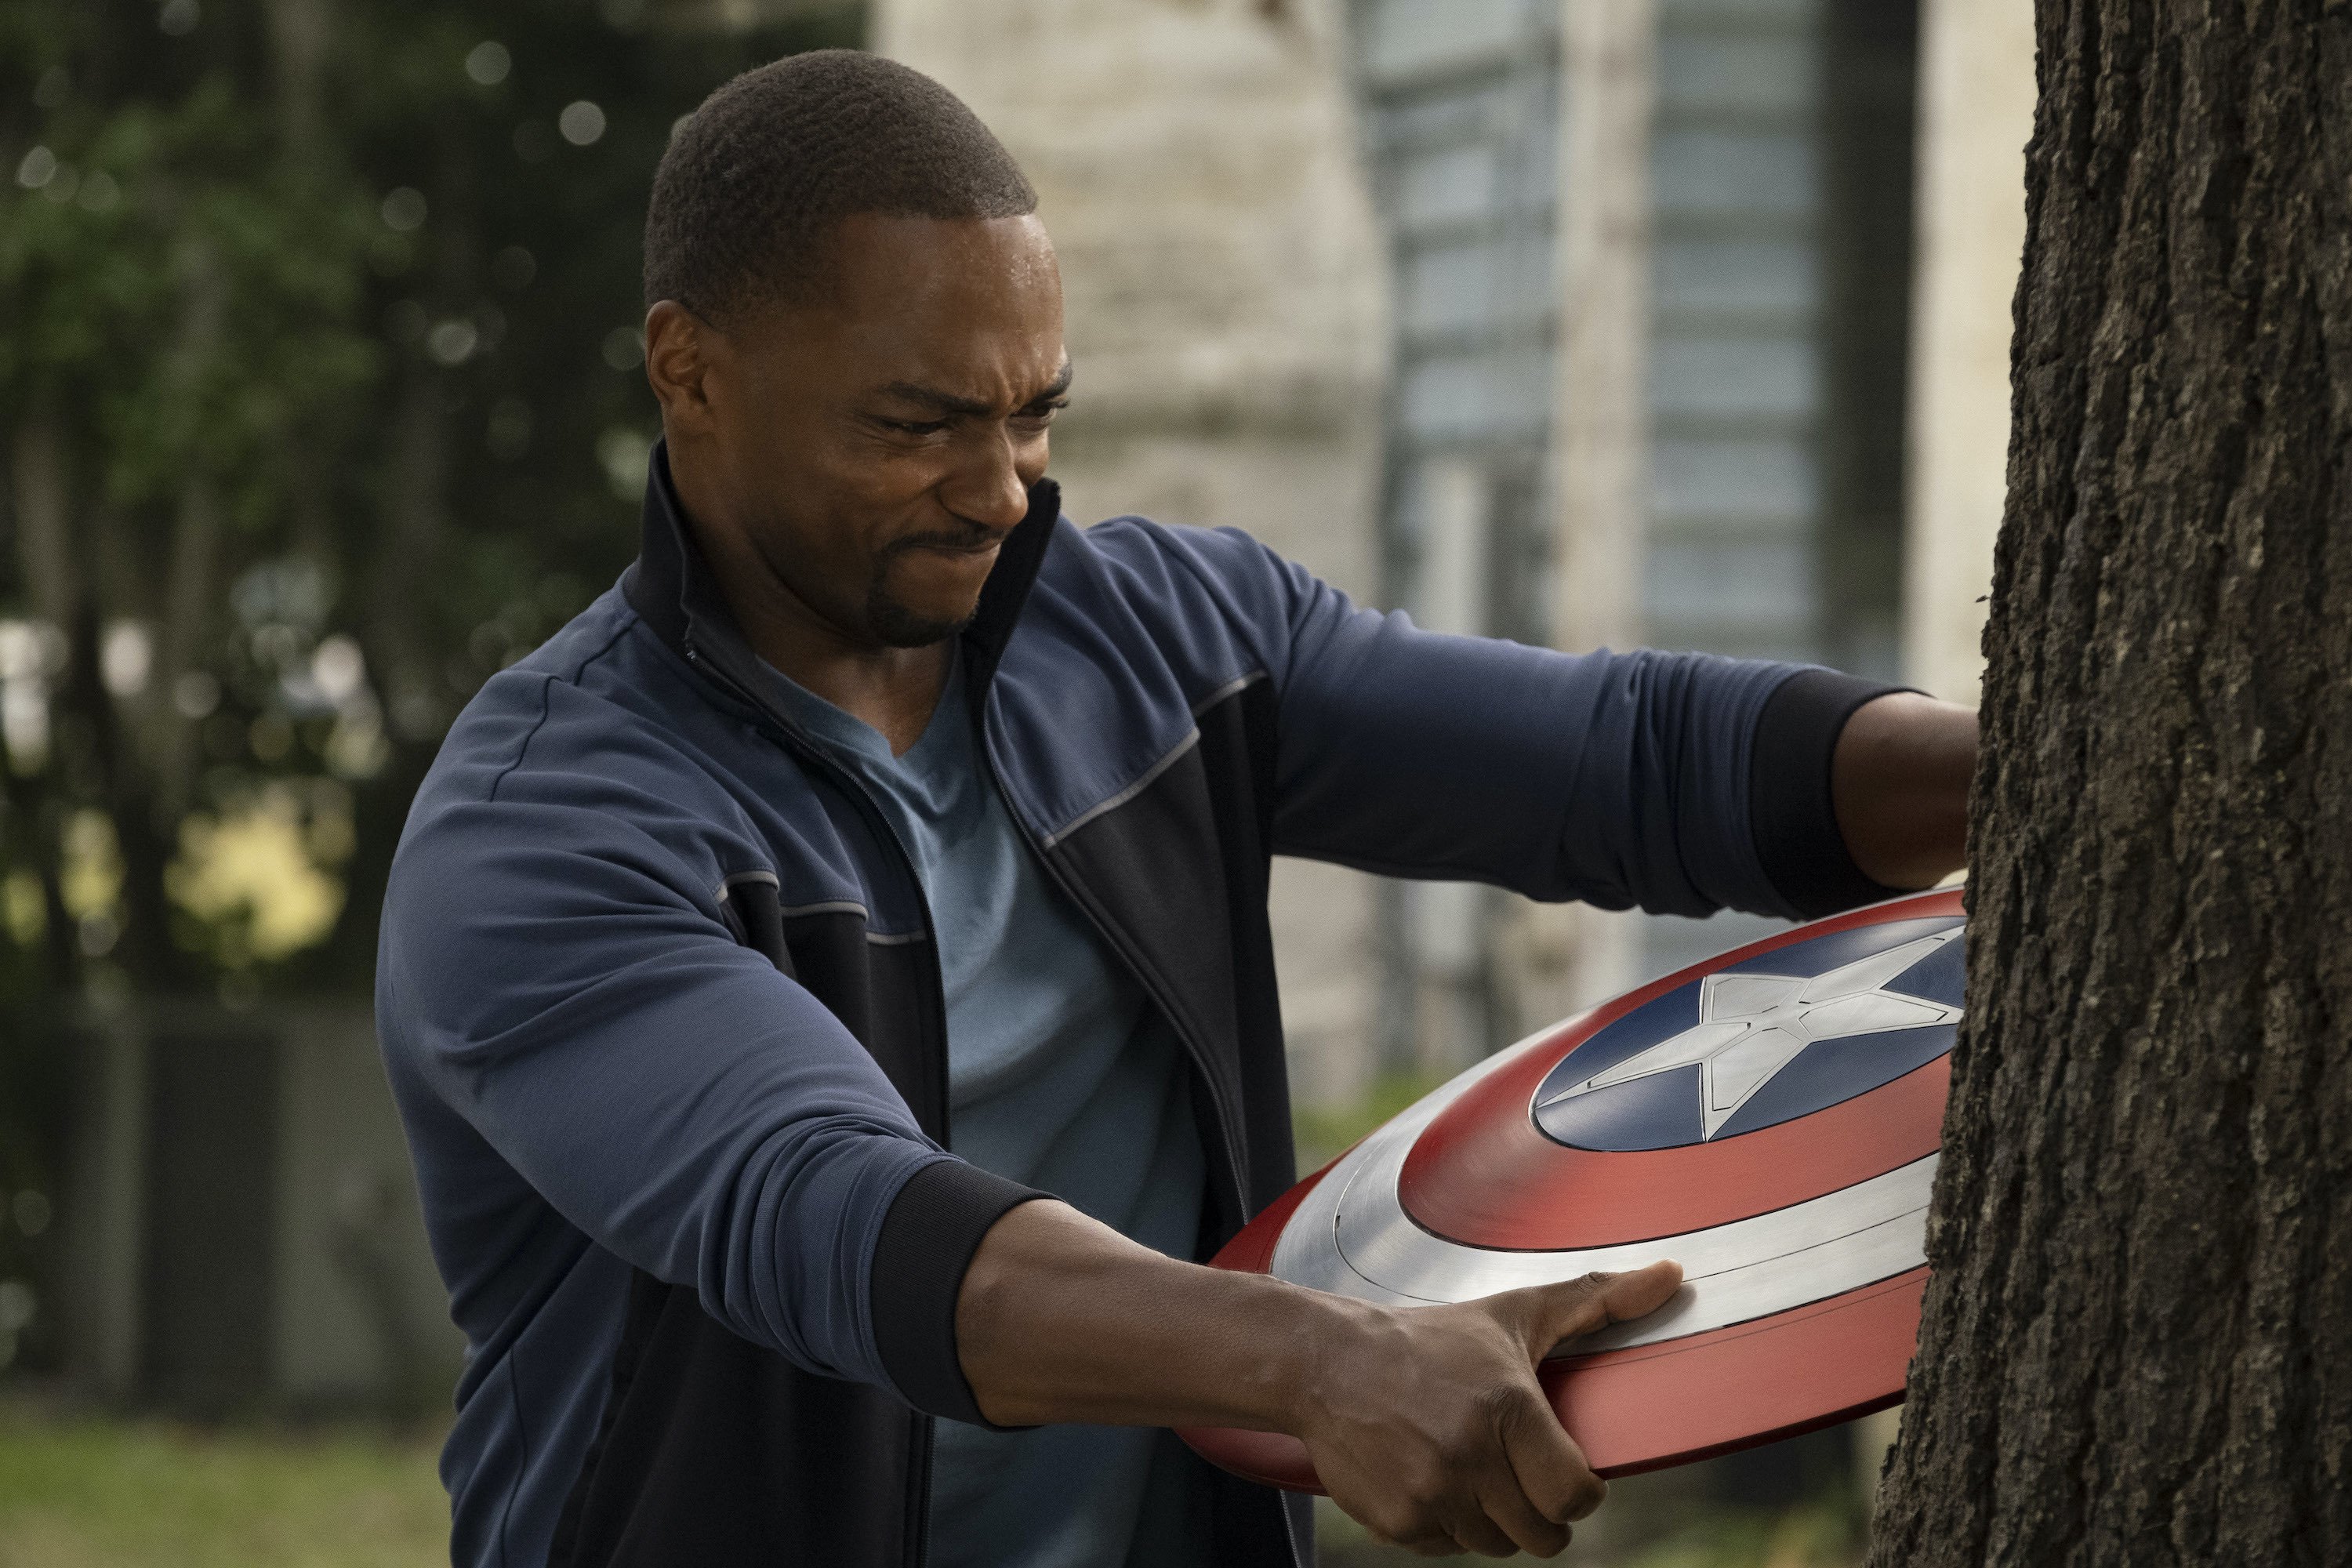 Marvel's original Disney+ series, 'The Falcon and the Winter Soldier' featuring Anthony Mackie as Sam Wilson pulling the shield out of a tree